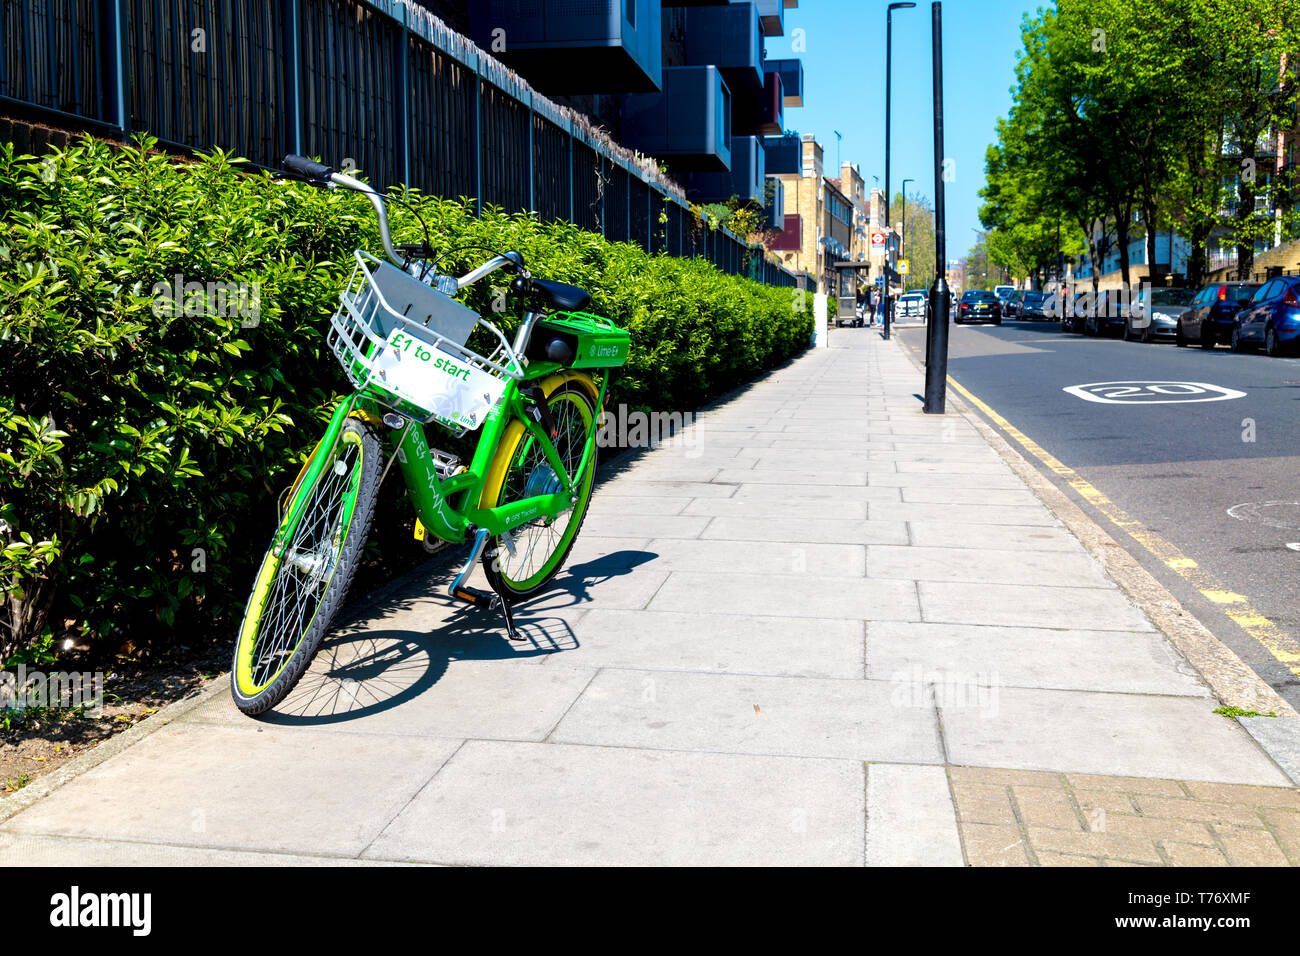 A dockless Lime-E rental electric bicycle standing on the street in East London, UK Stock Photo